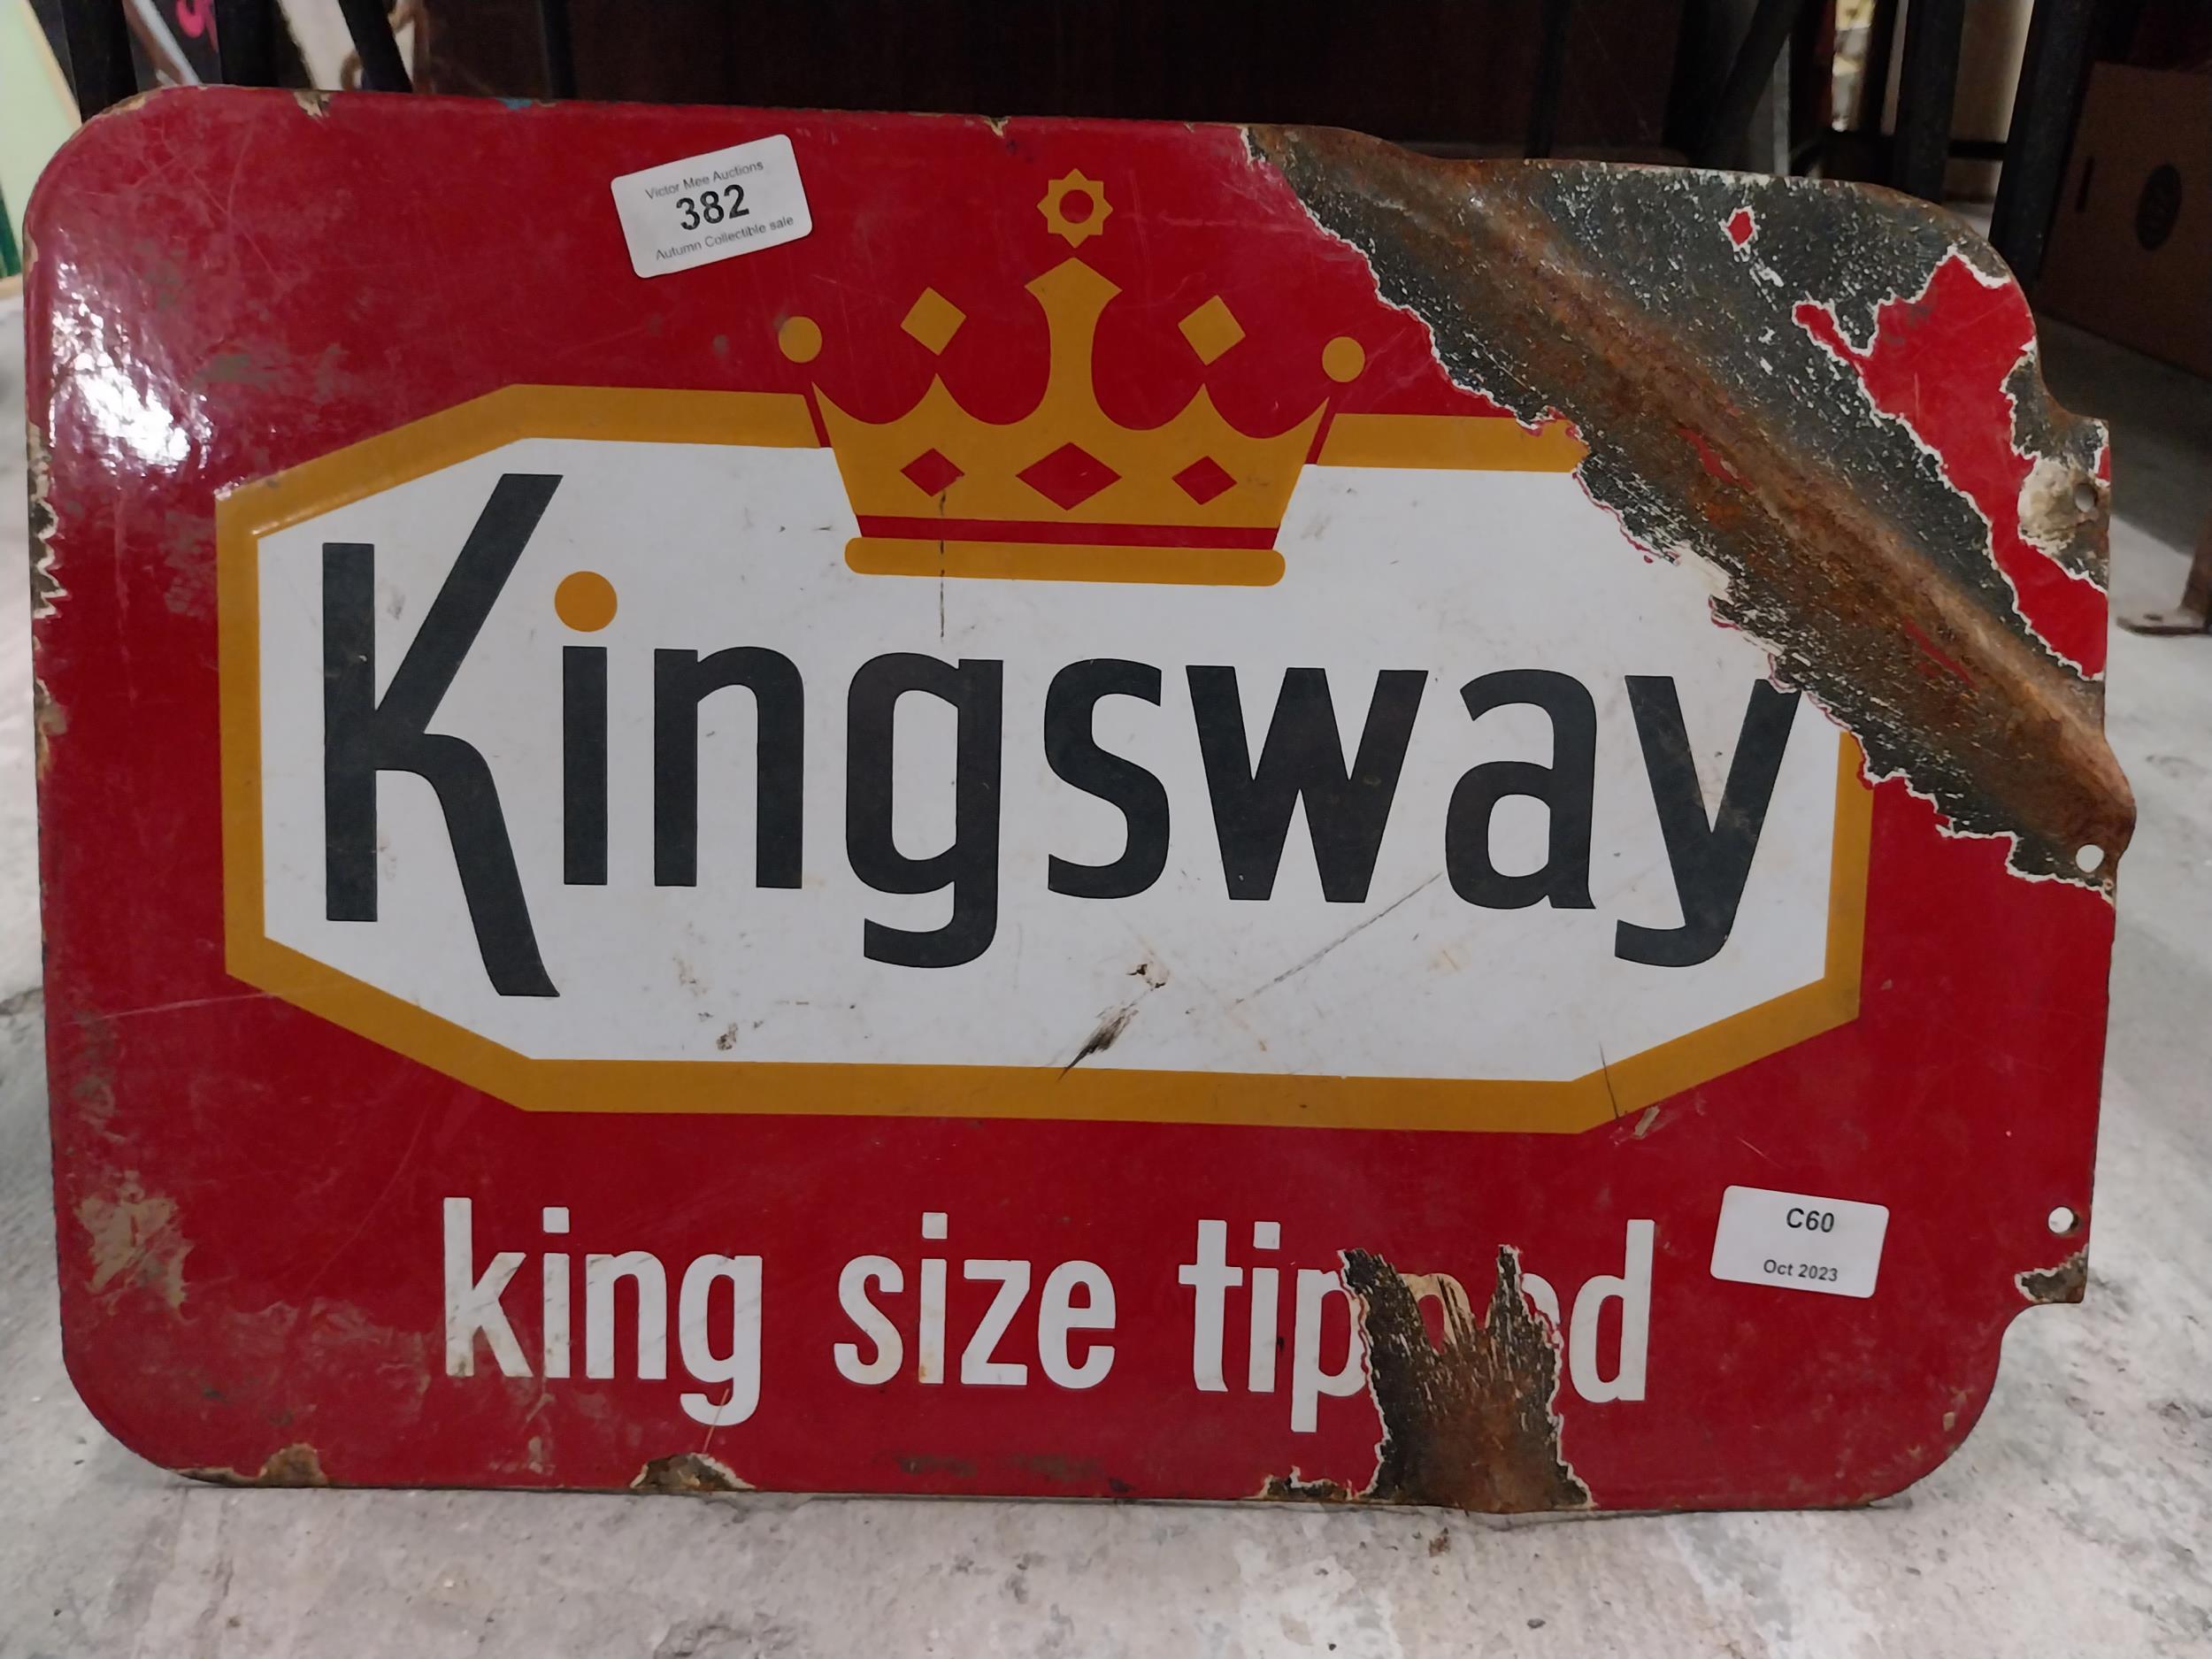 Kingsway Cigarettes/Bristol Cigarettes double sided enamel advertising sign. {30 cm H x 45 cm W}. - Image 4 of 4